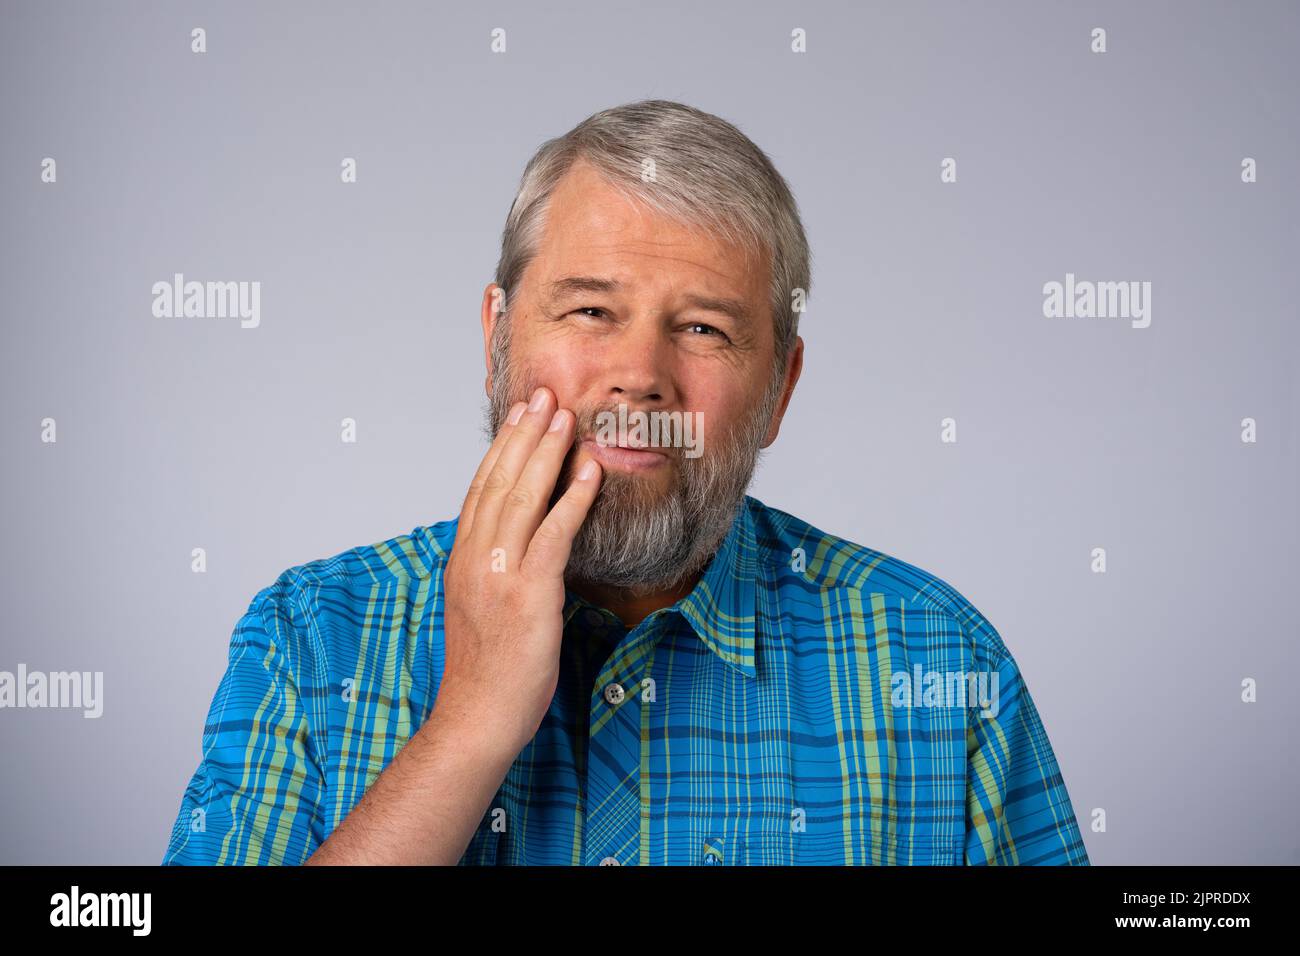 Man 55 years with toothache, snivelling Stock Photo